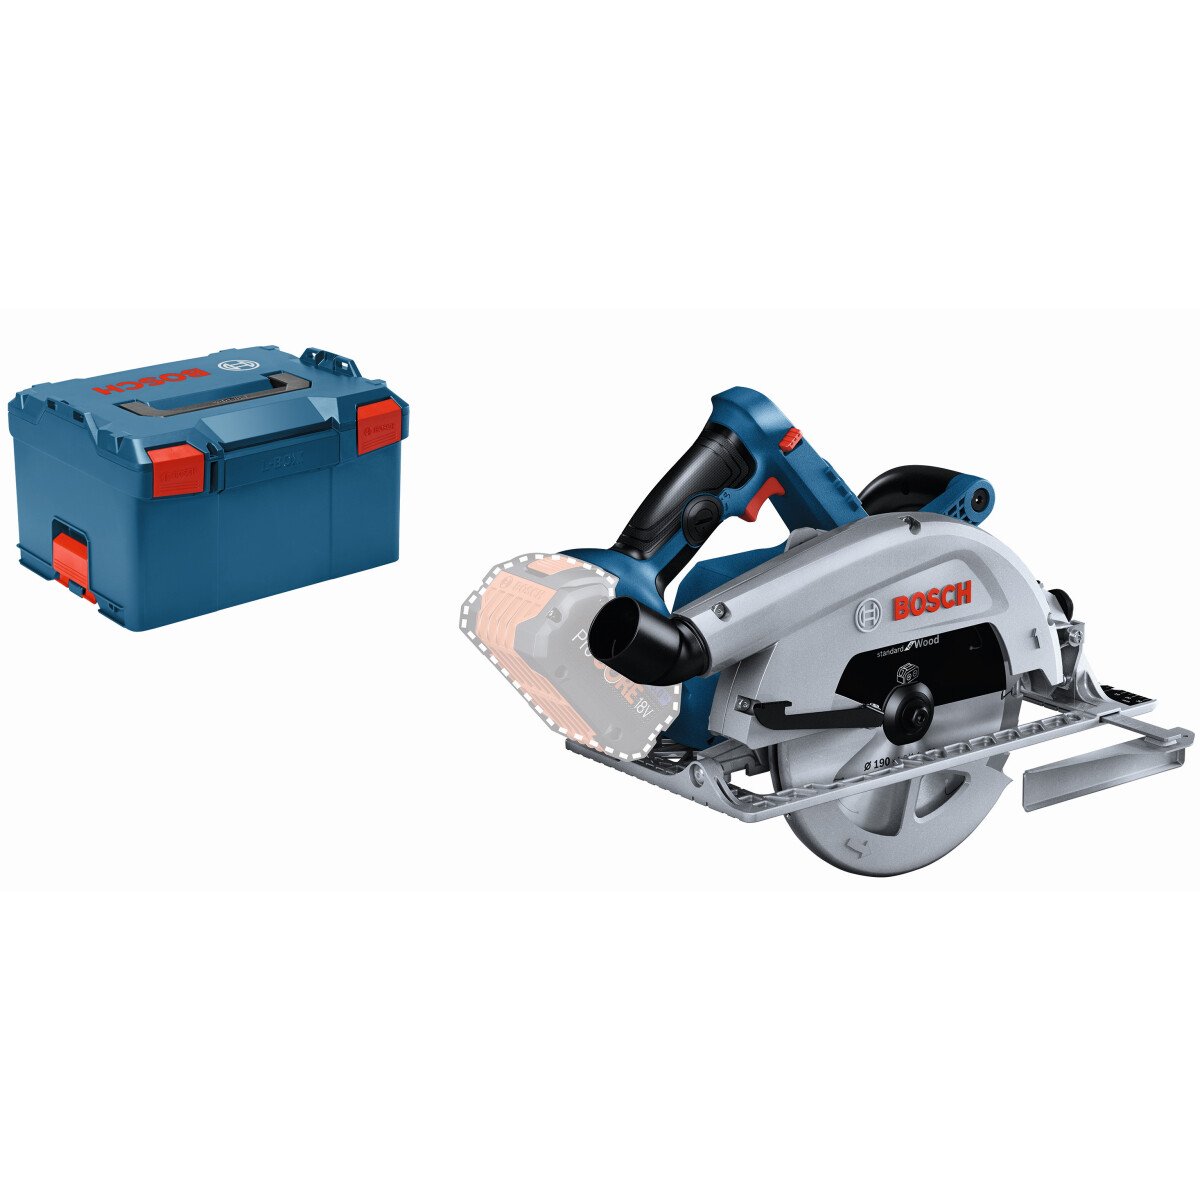 Bosch GKS18V-68CN Body Only 18V BITURBO Brushles Connection Ready190mm Circular Saw in Carton